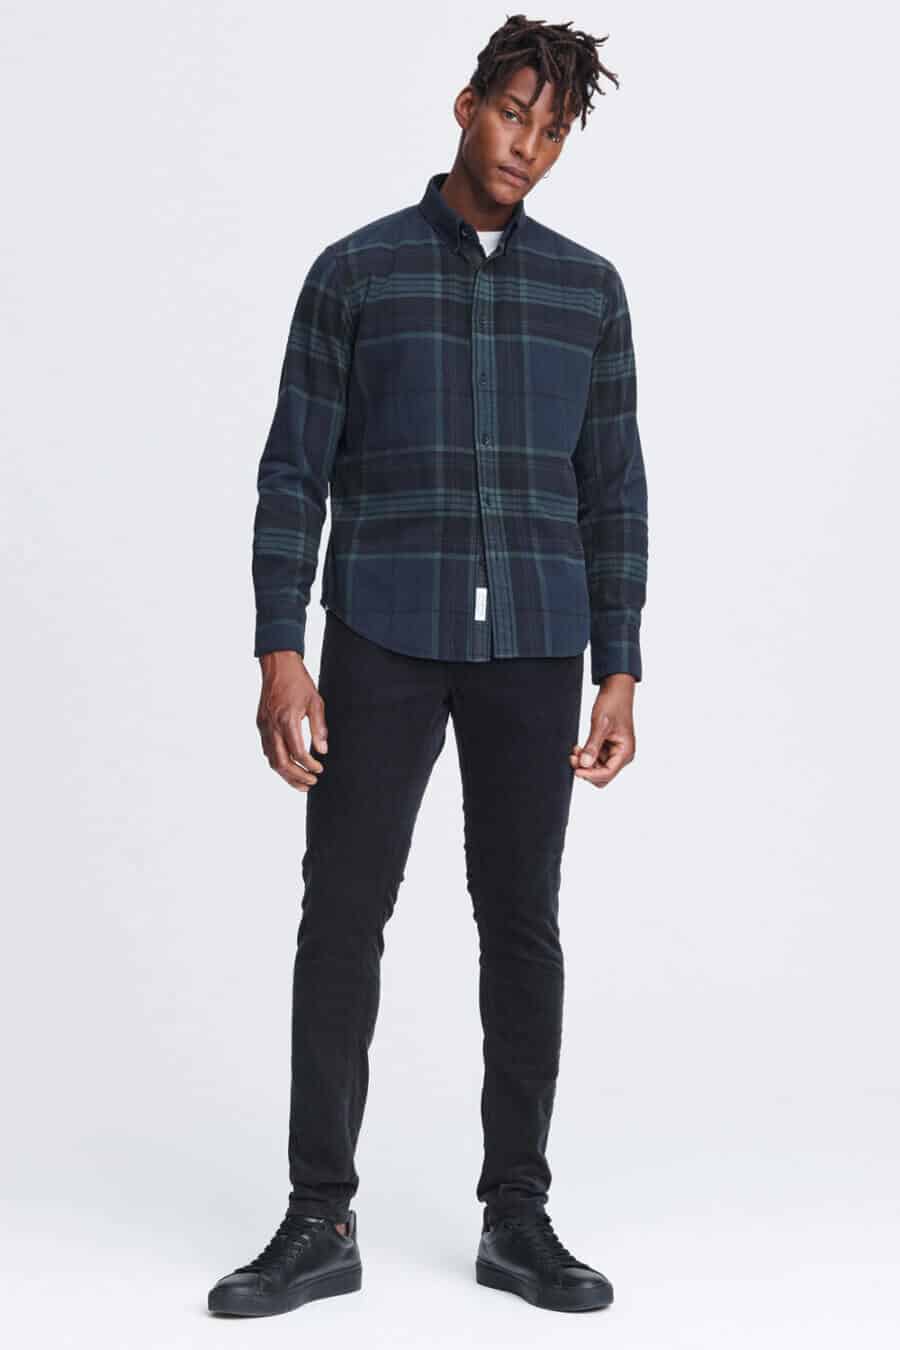 Men's black jeans worn with a black watch tartan flannel shirt and black sneakers